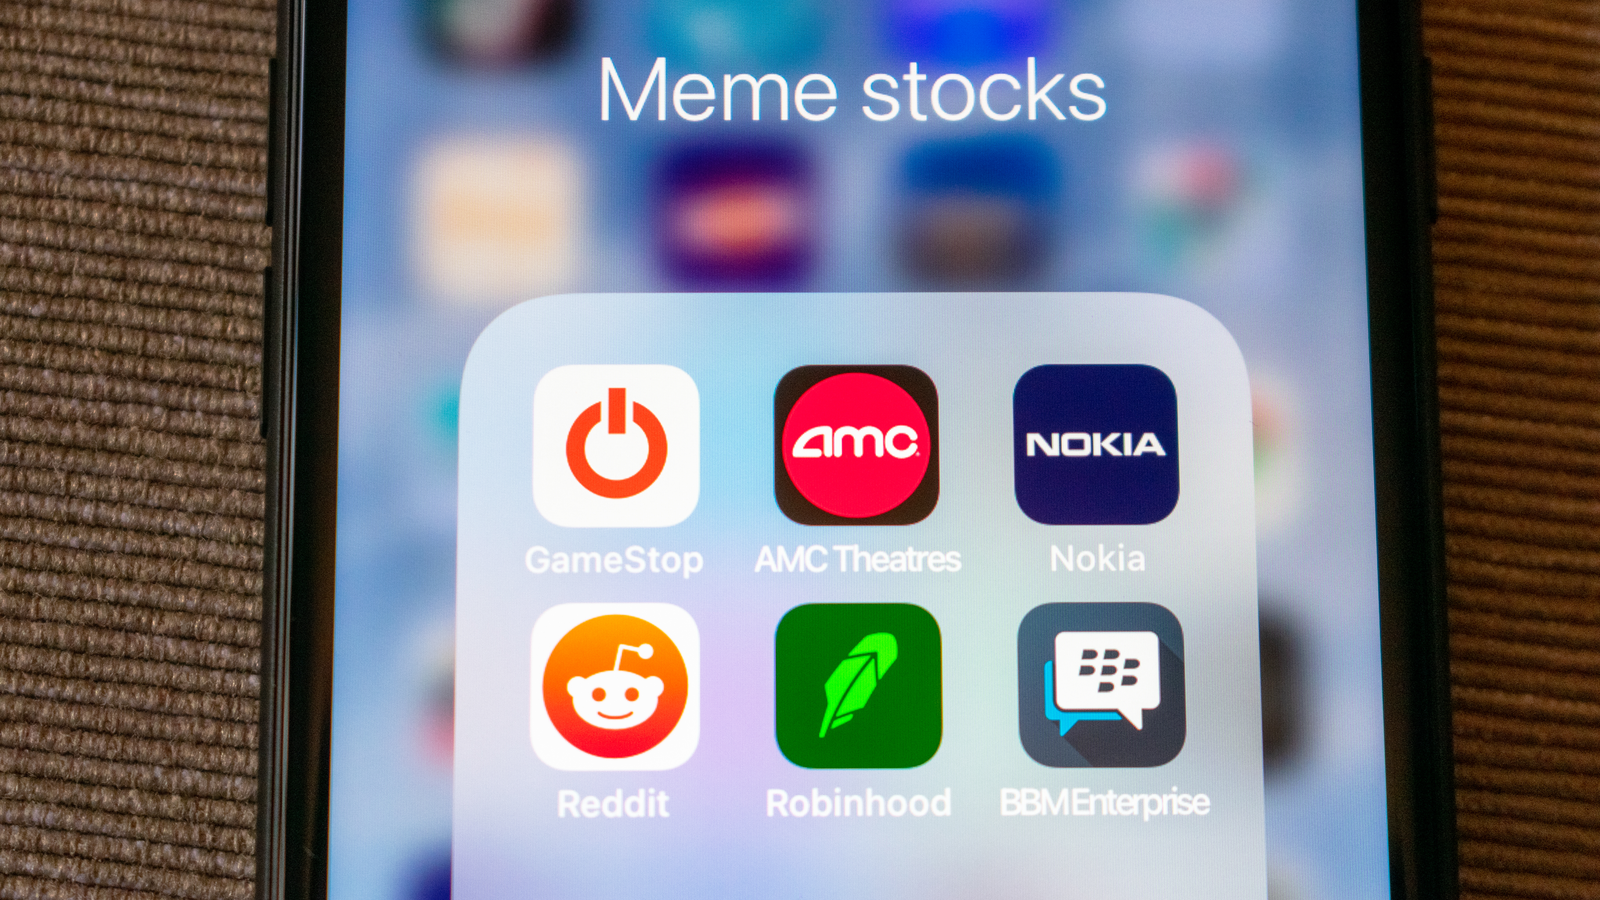 If You Can Only Buy One Meme Stock in April, It Better Be One of These 3 Names